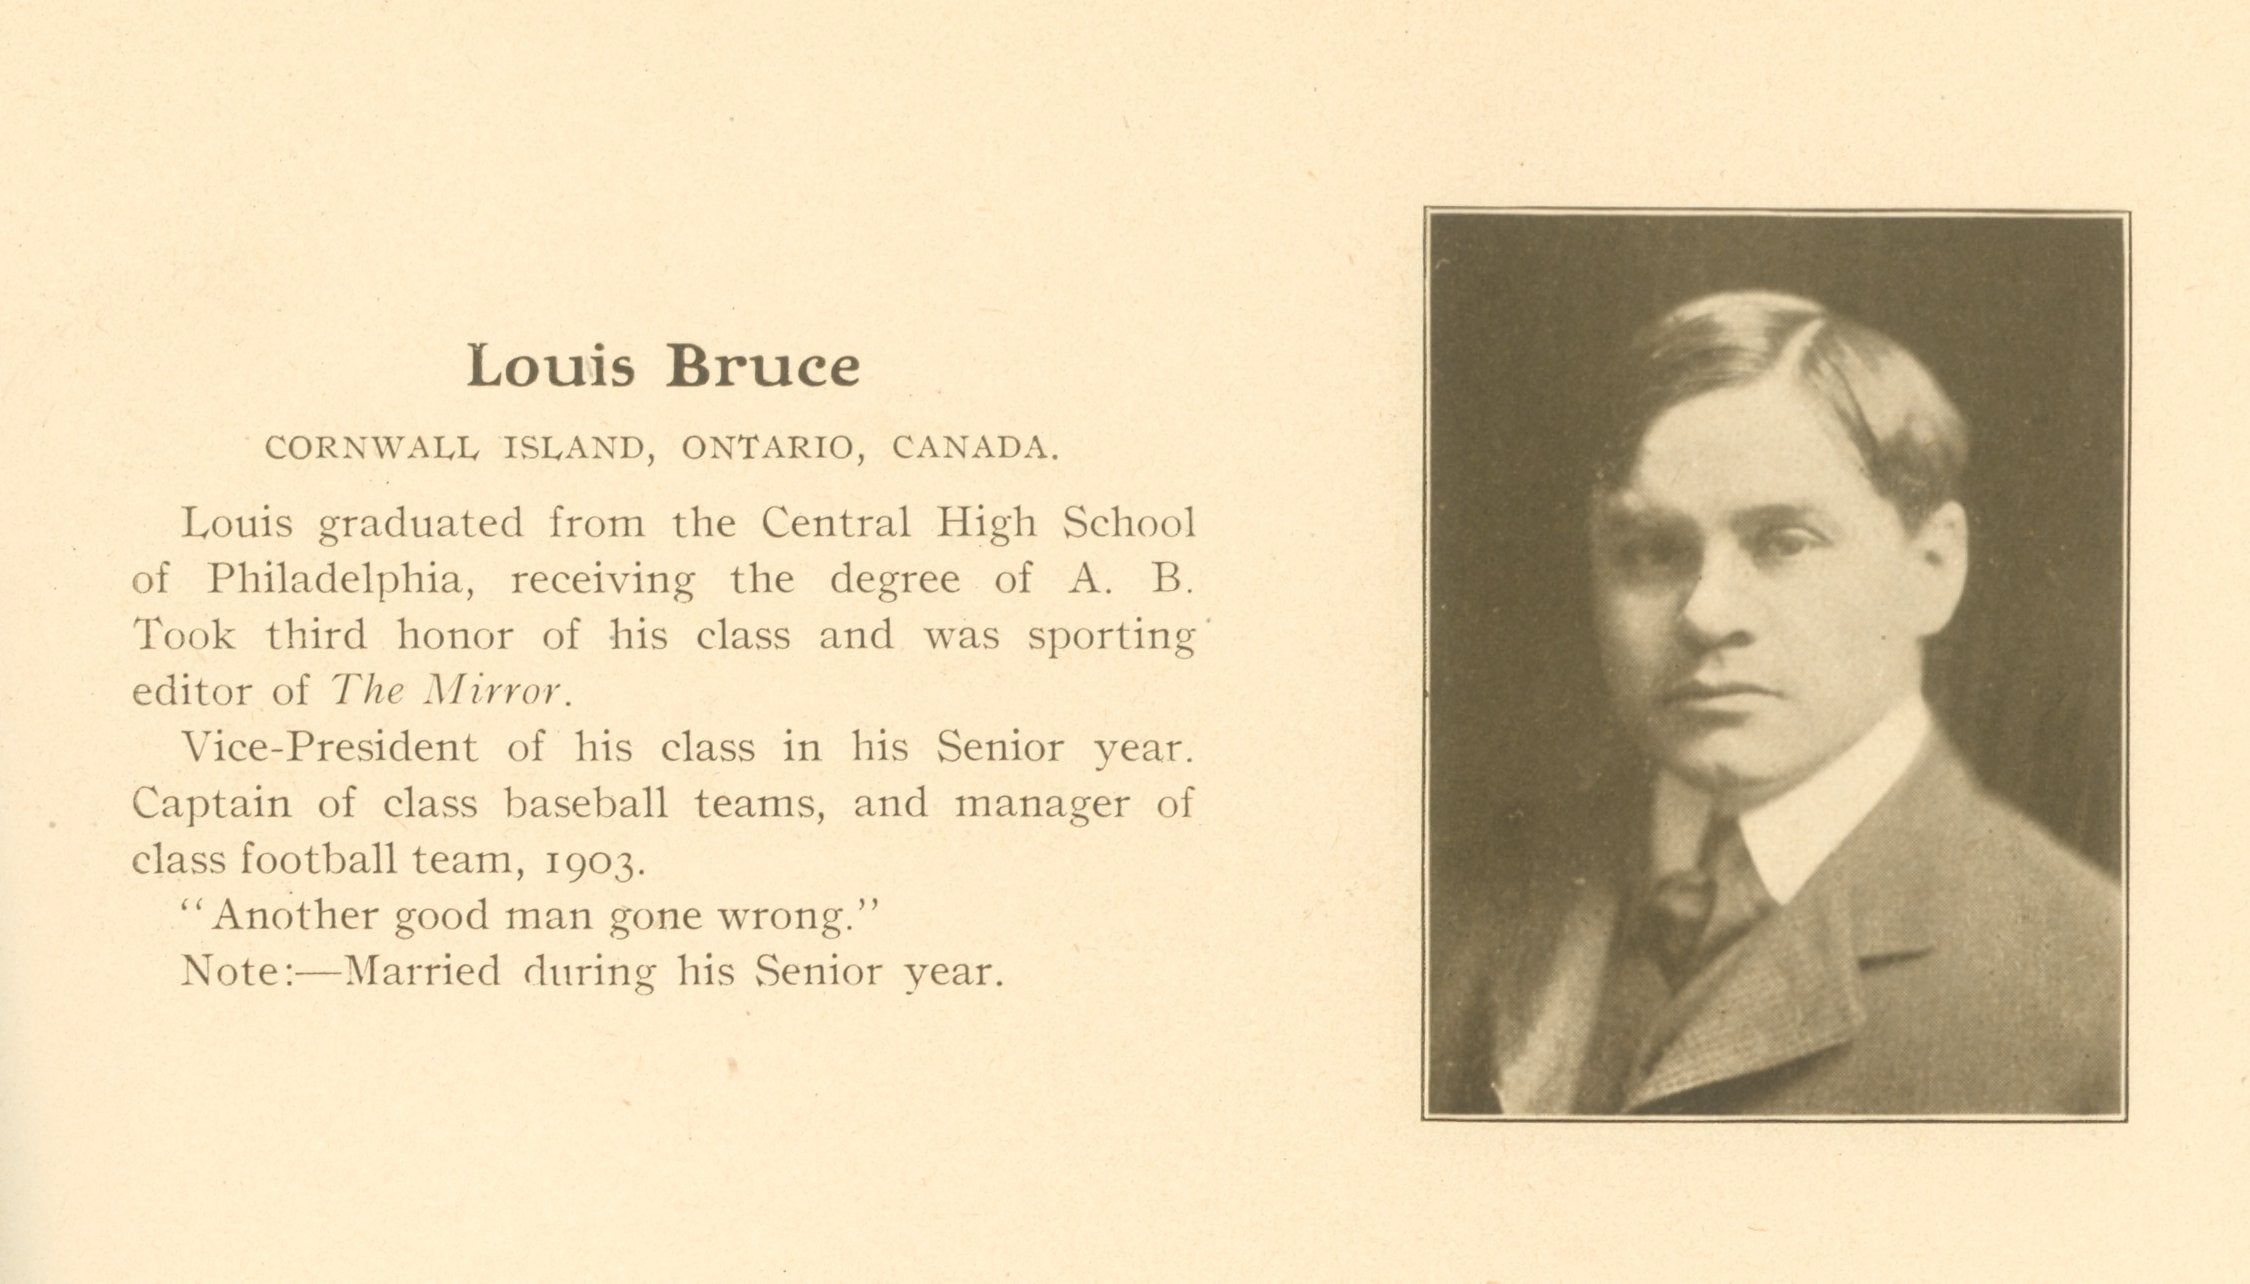 Louis Bruce, yearbook entry, 1904